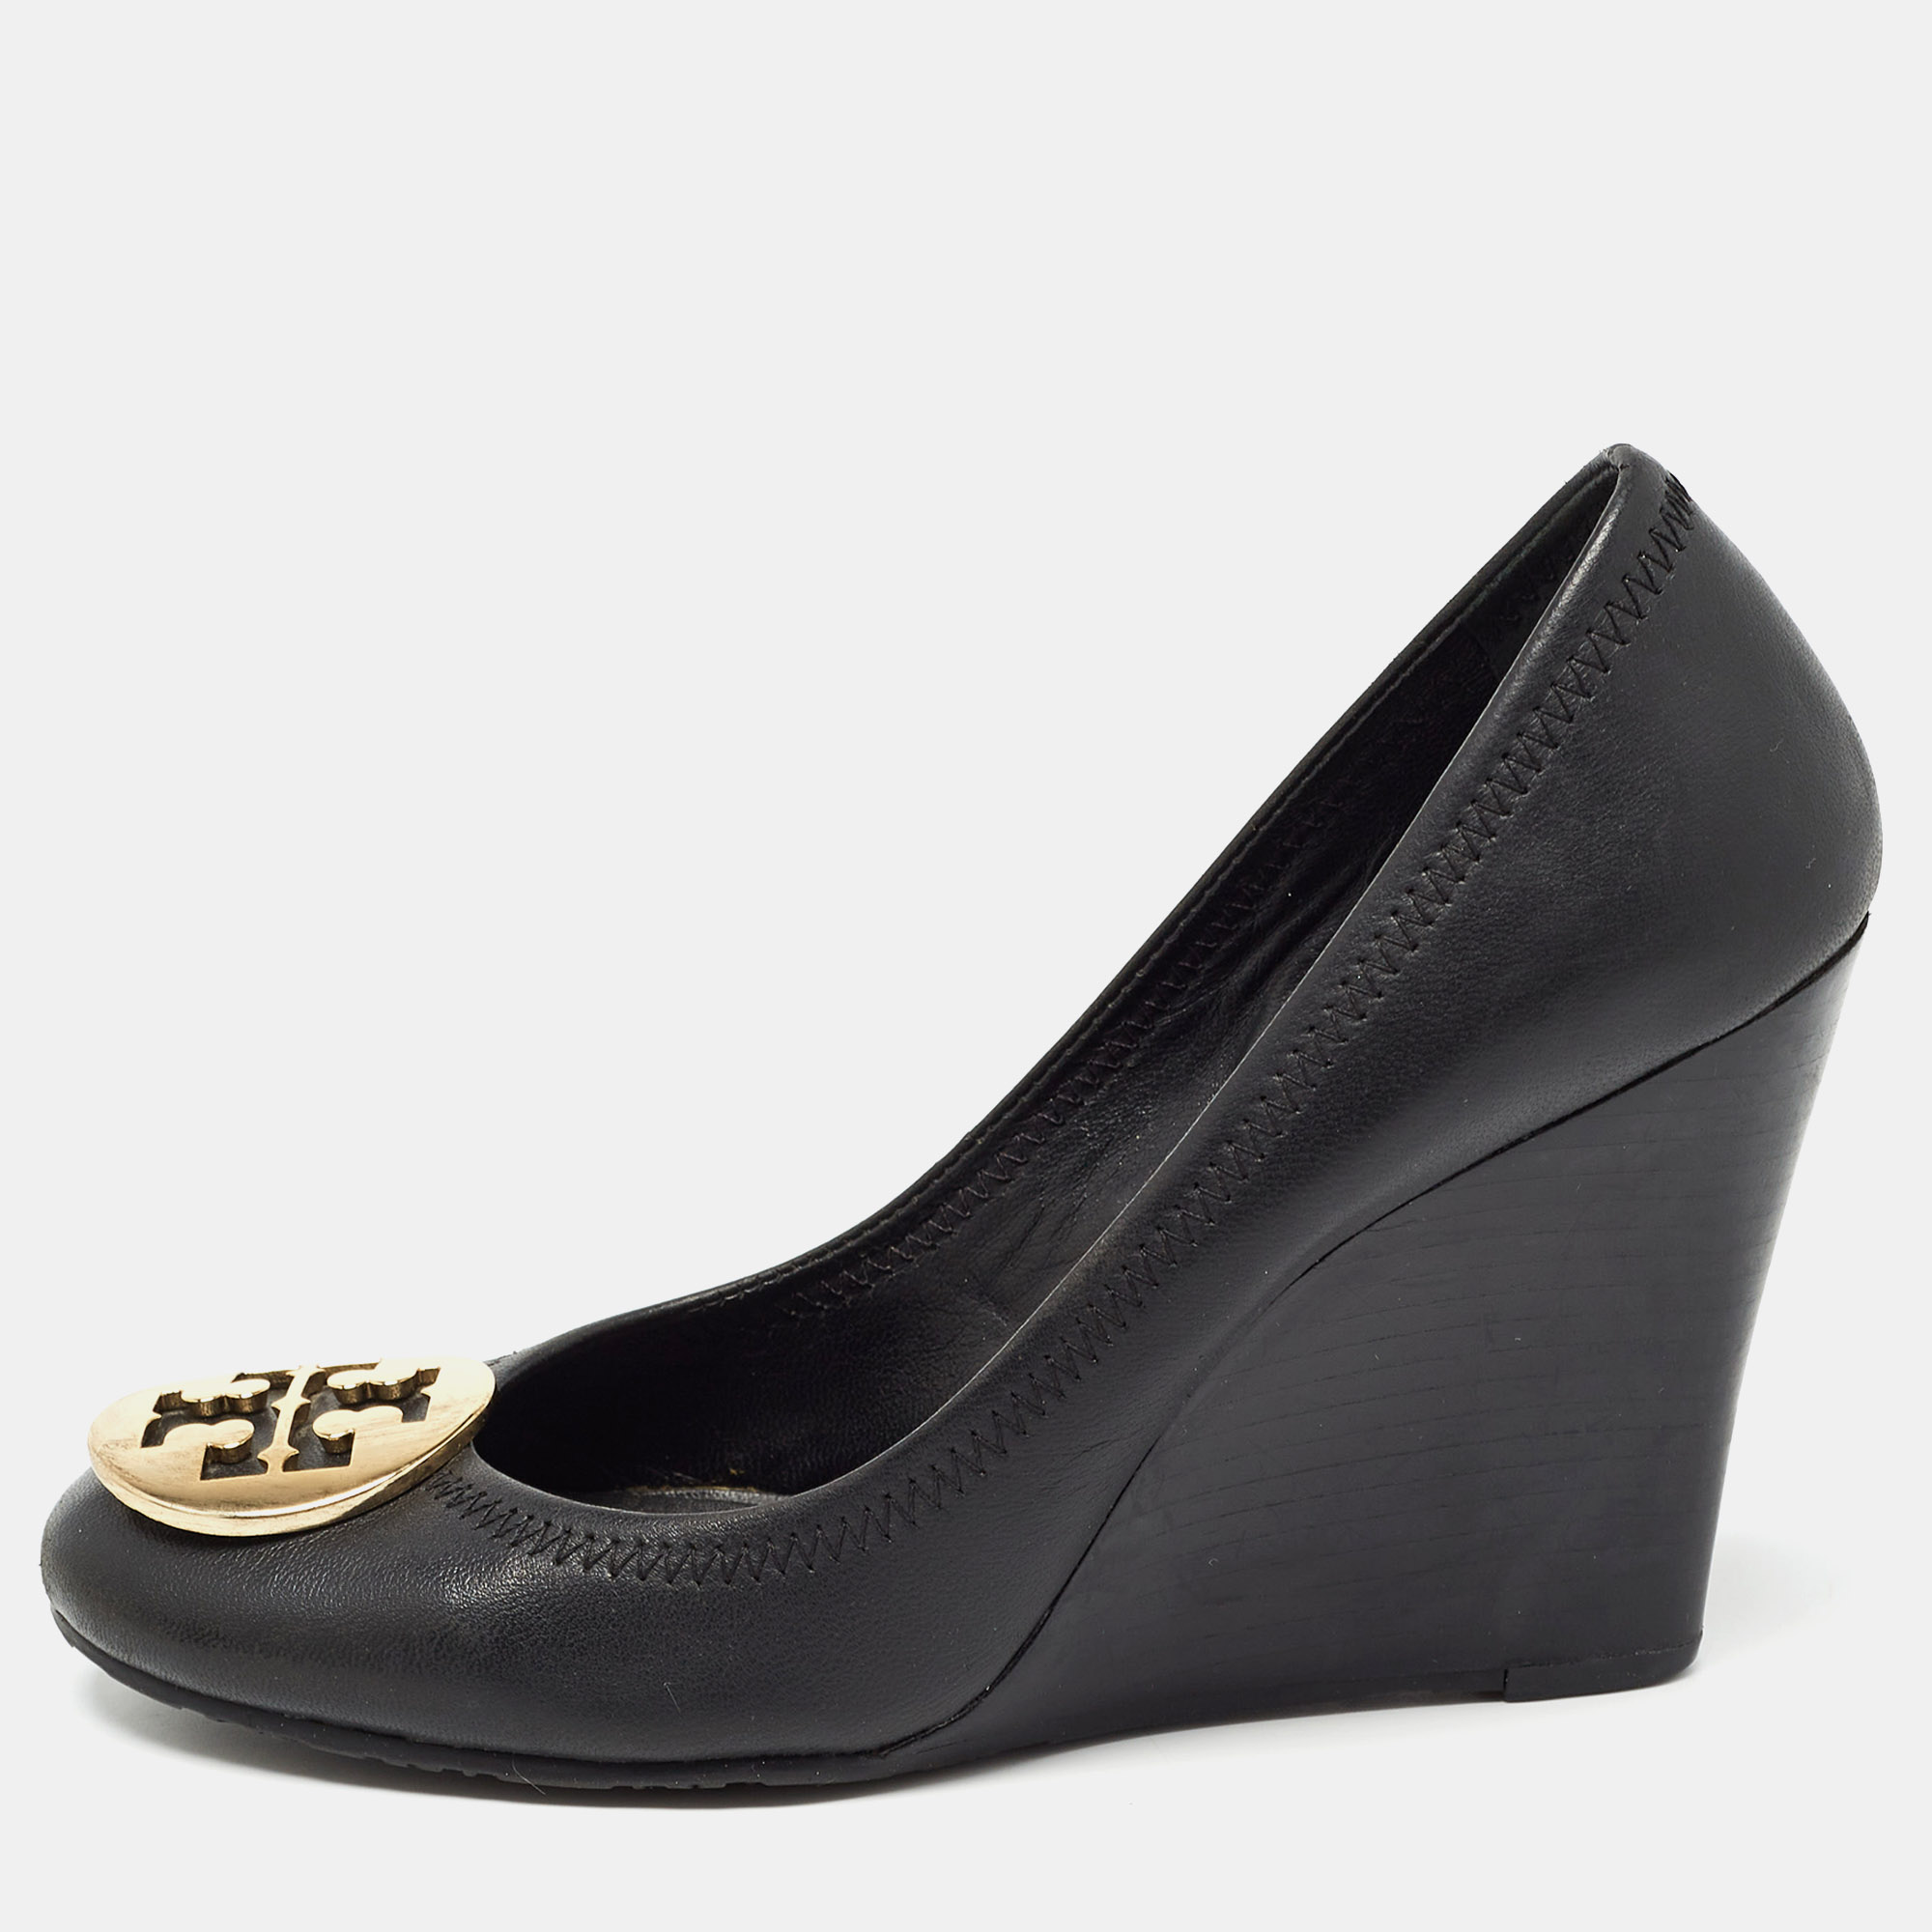 

Tory Burch Black Leather Sally Wedge Pumps Size 37.5